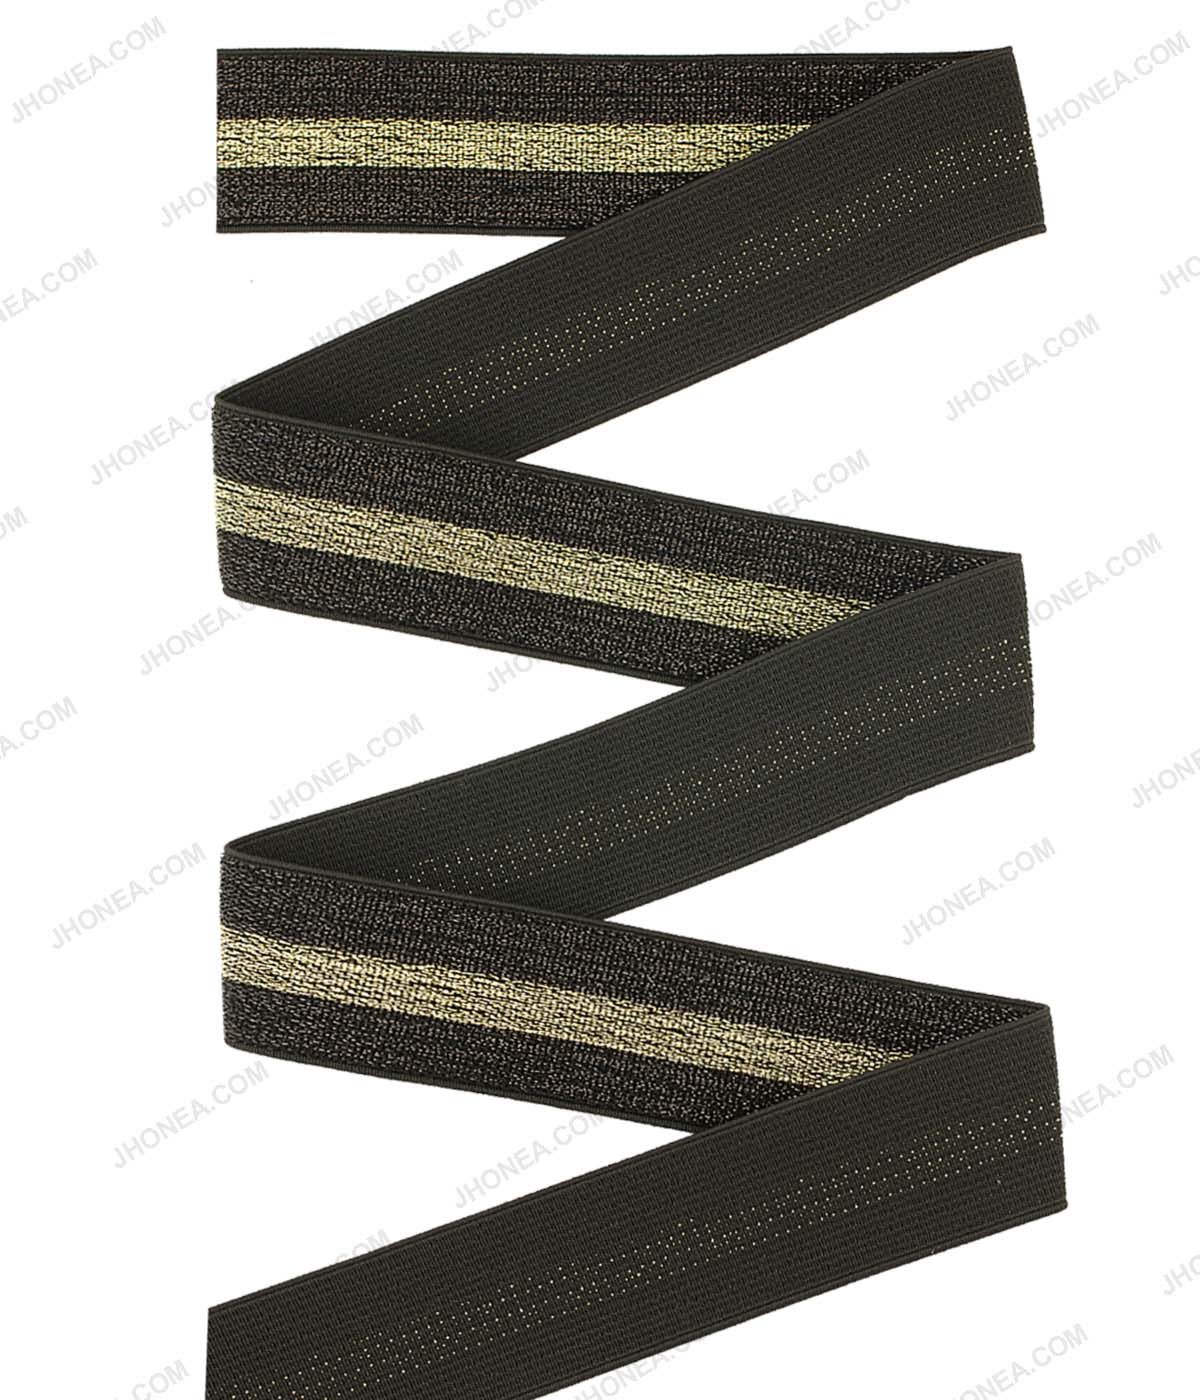 Shiny Metallic 1.5inch wide Fancy Lurex Knit Elastic for Party Wear in Black with Gold Color